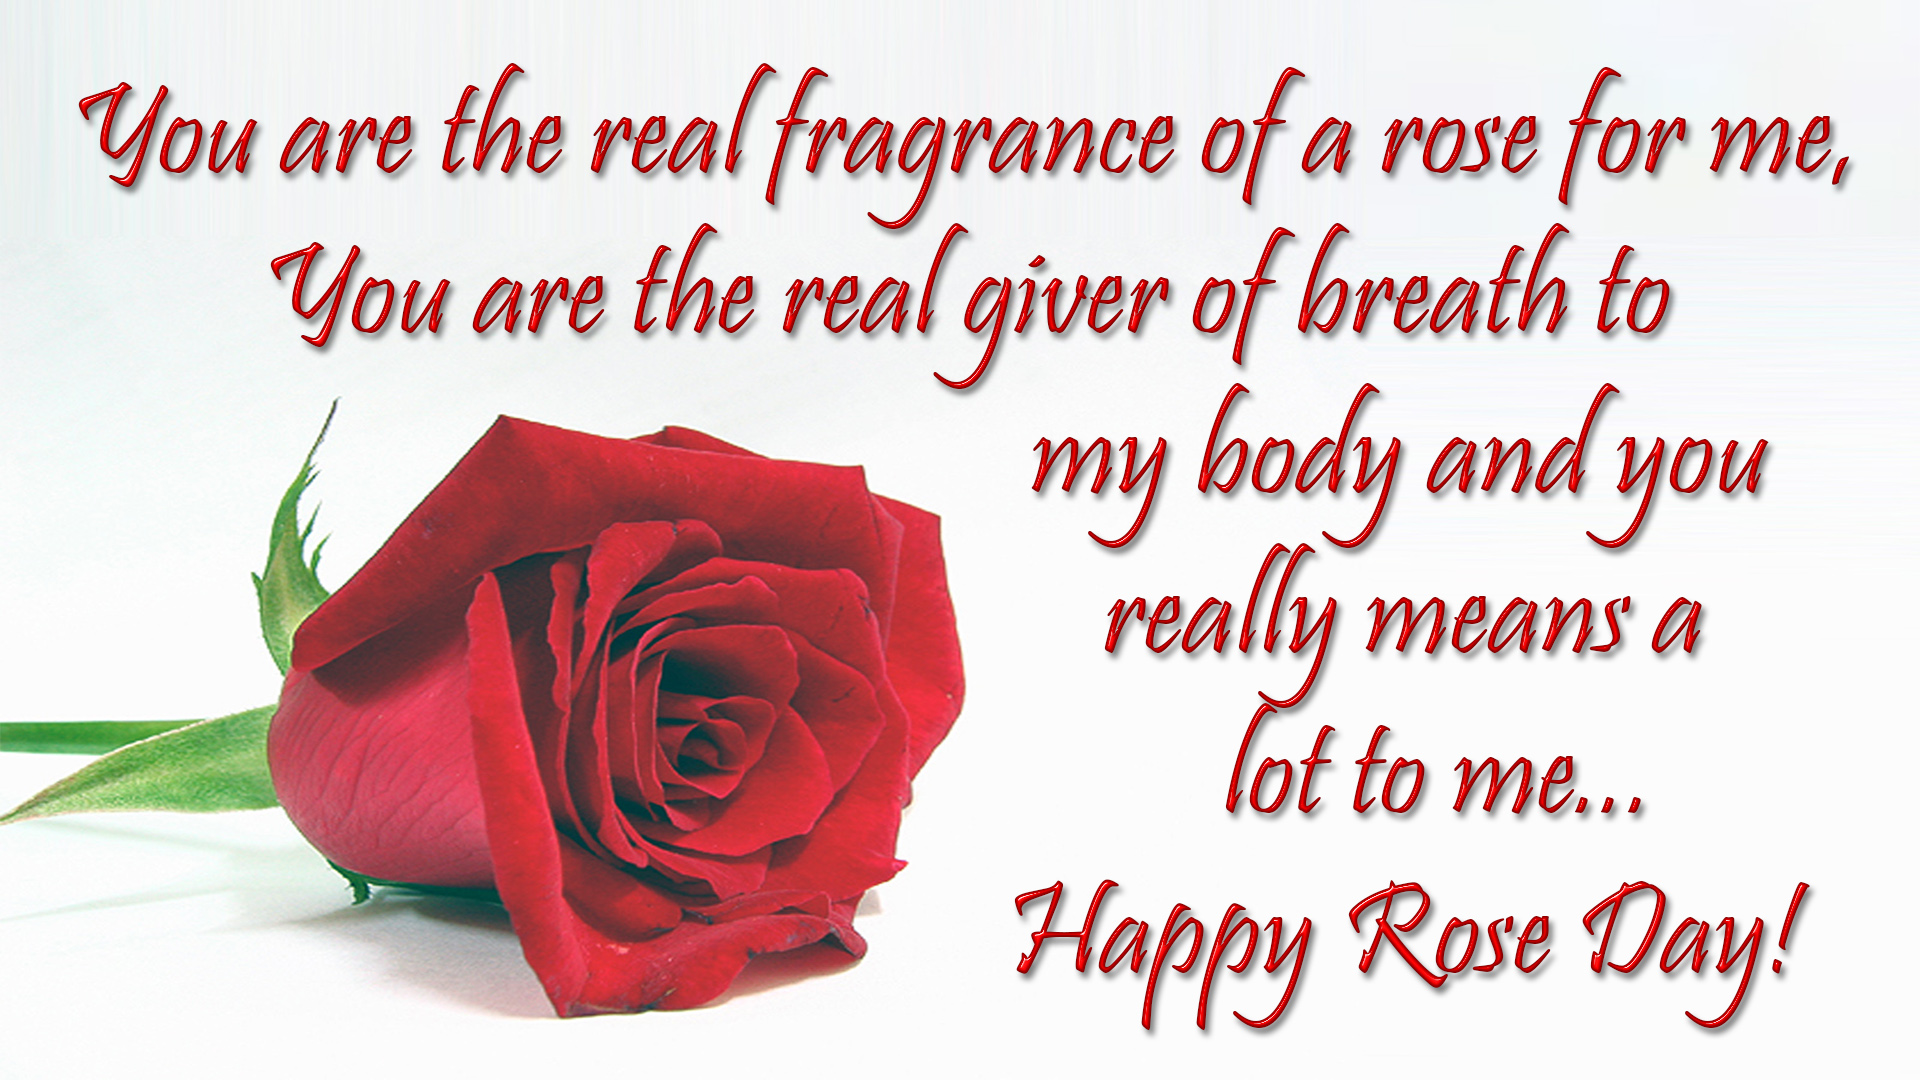 rose day wishes 2019